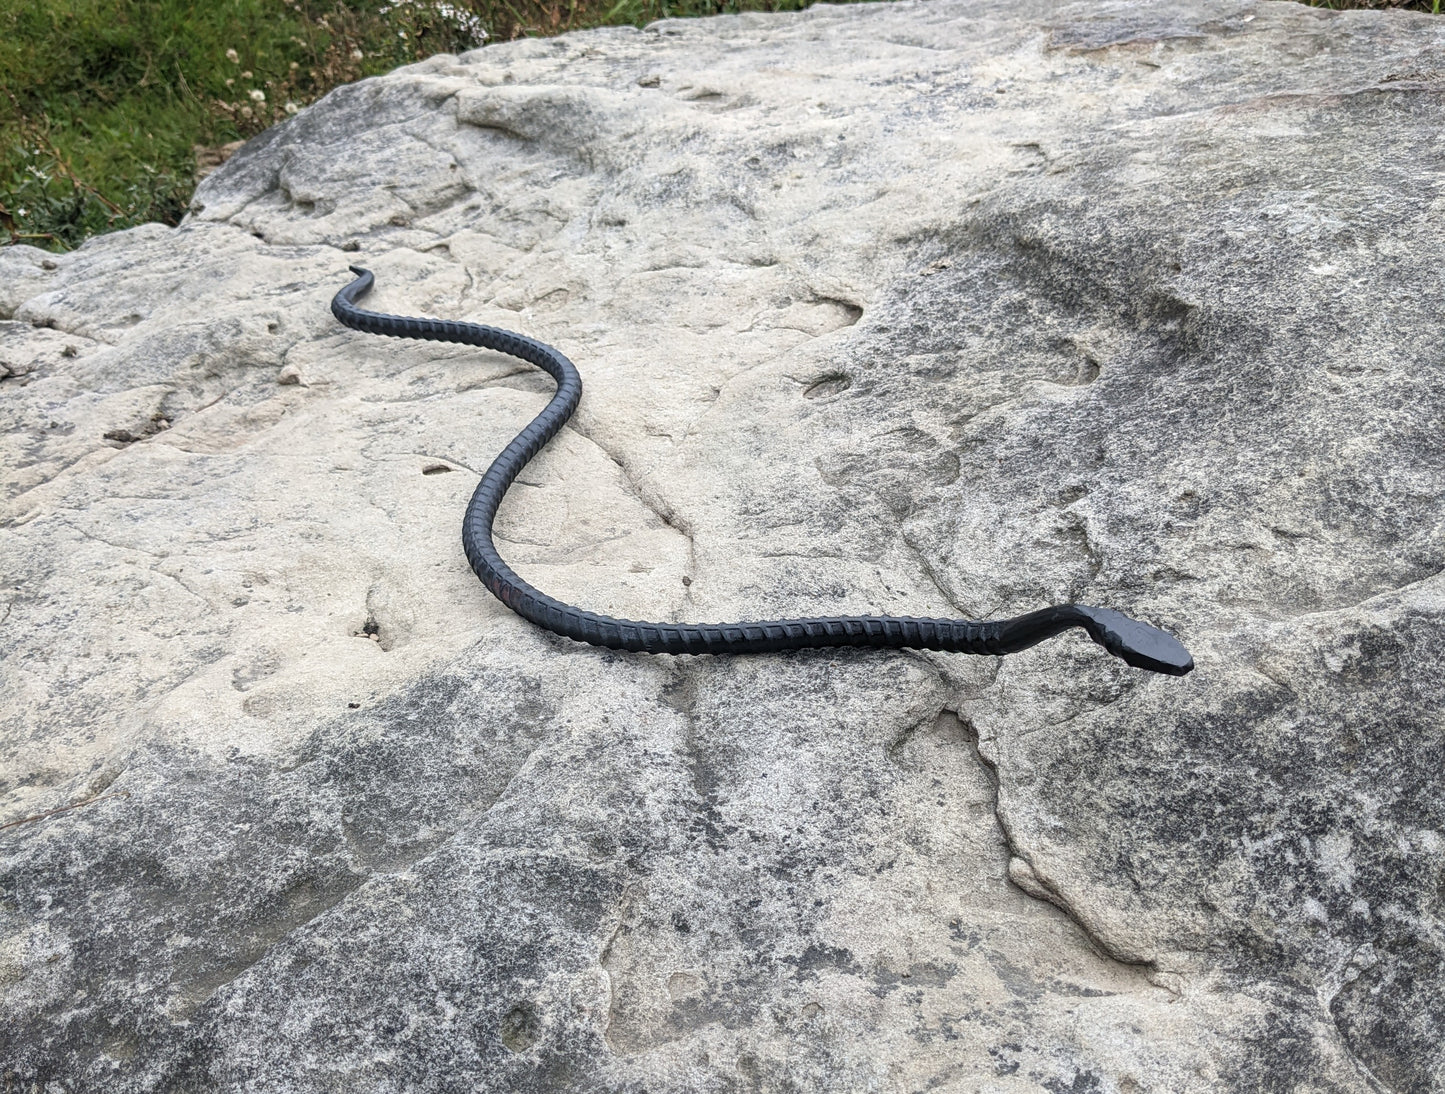 Sneaky Snake Hand Forged Garden Ornament-great for scaring birds away from your garden!